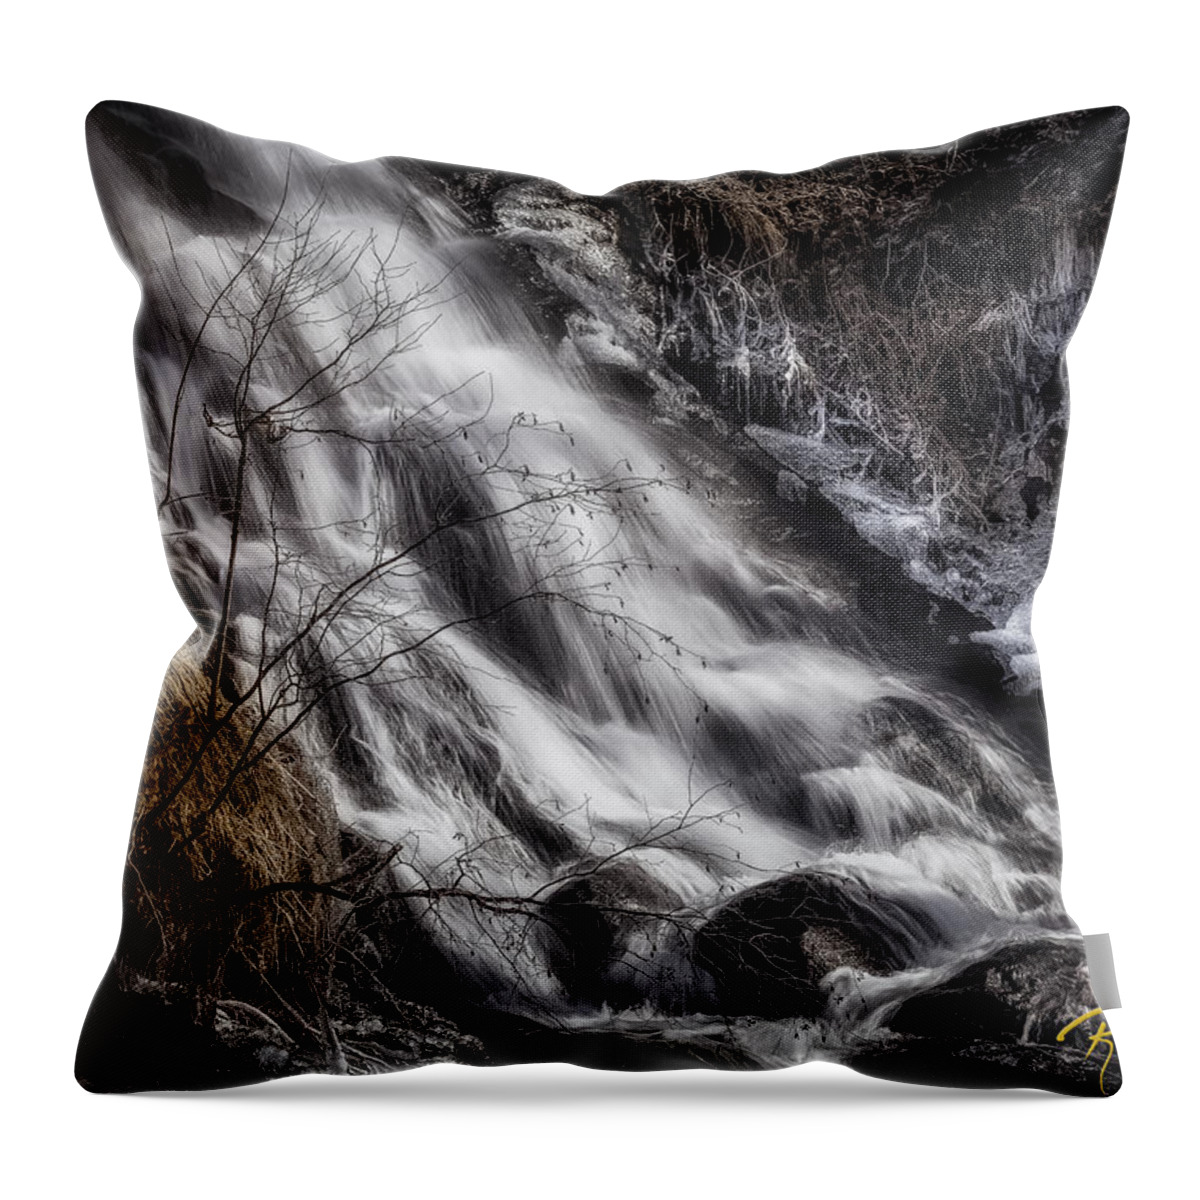 Flowing Throw Pillow featuring the photograph Ghostly Flows by Rikk Flohr